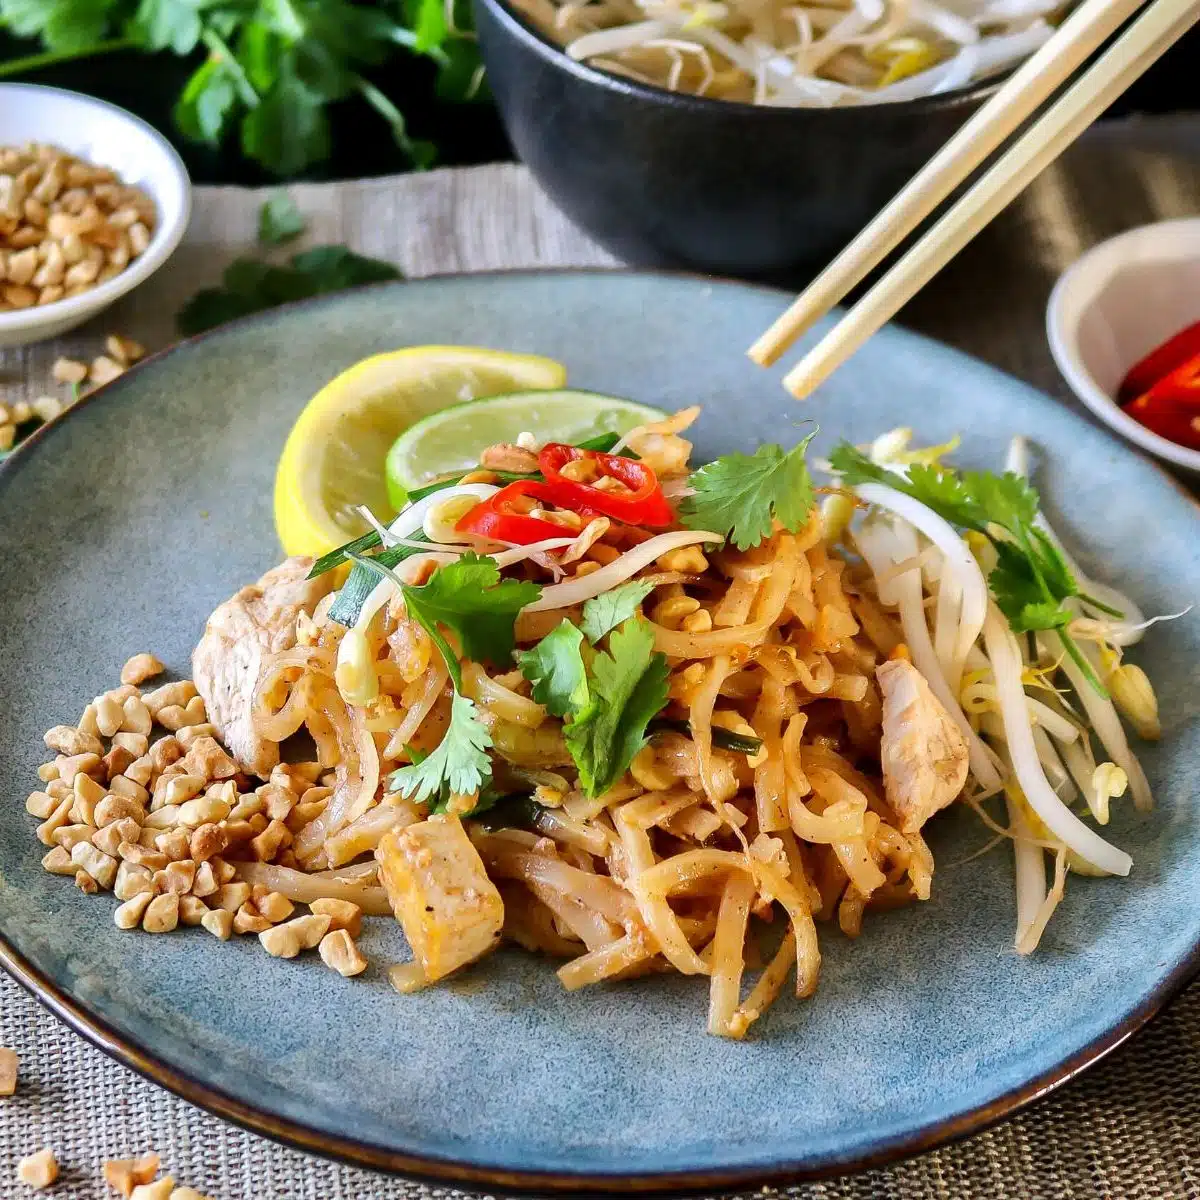 Square image of pad thai on a blue plate.